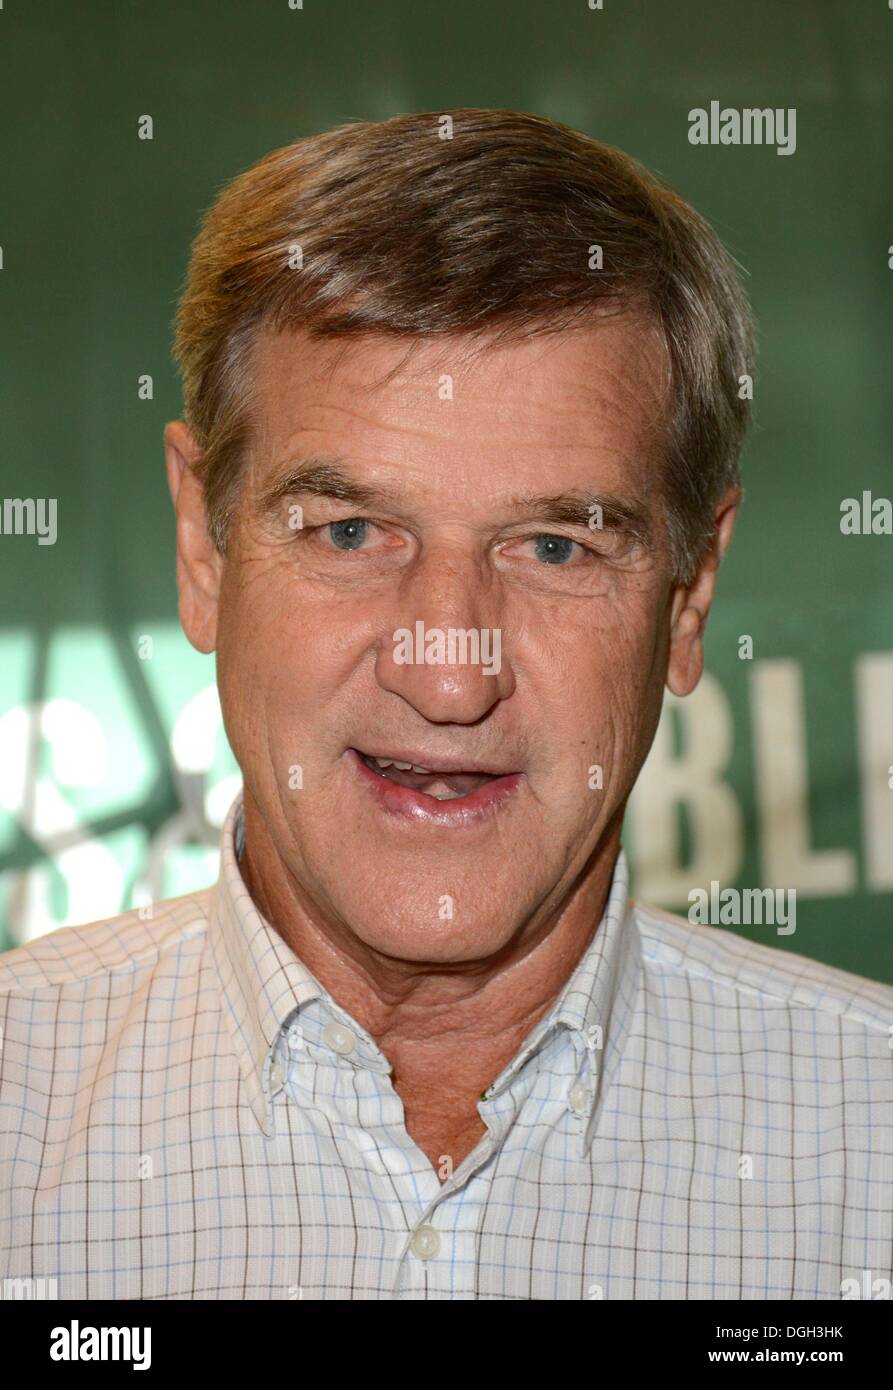 New York, NY, USA. 21st Oct, 2013. Bobby Orr at in-store appearance for Bobby Orr Book Signing for 'Orr: My Story', Barnes and Noble Citigroup Center, New York, NY October 21, 2013. Credit:  Derek Storm/Everett Collection/Alamy Live News Stock Photo